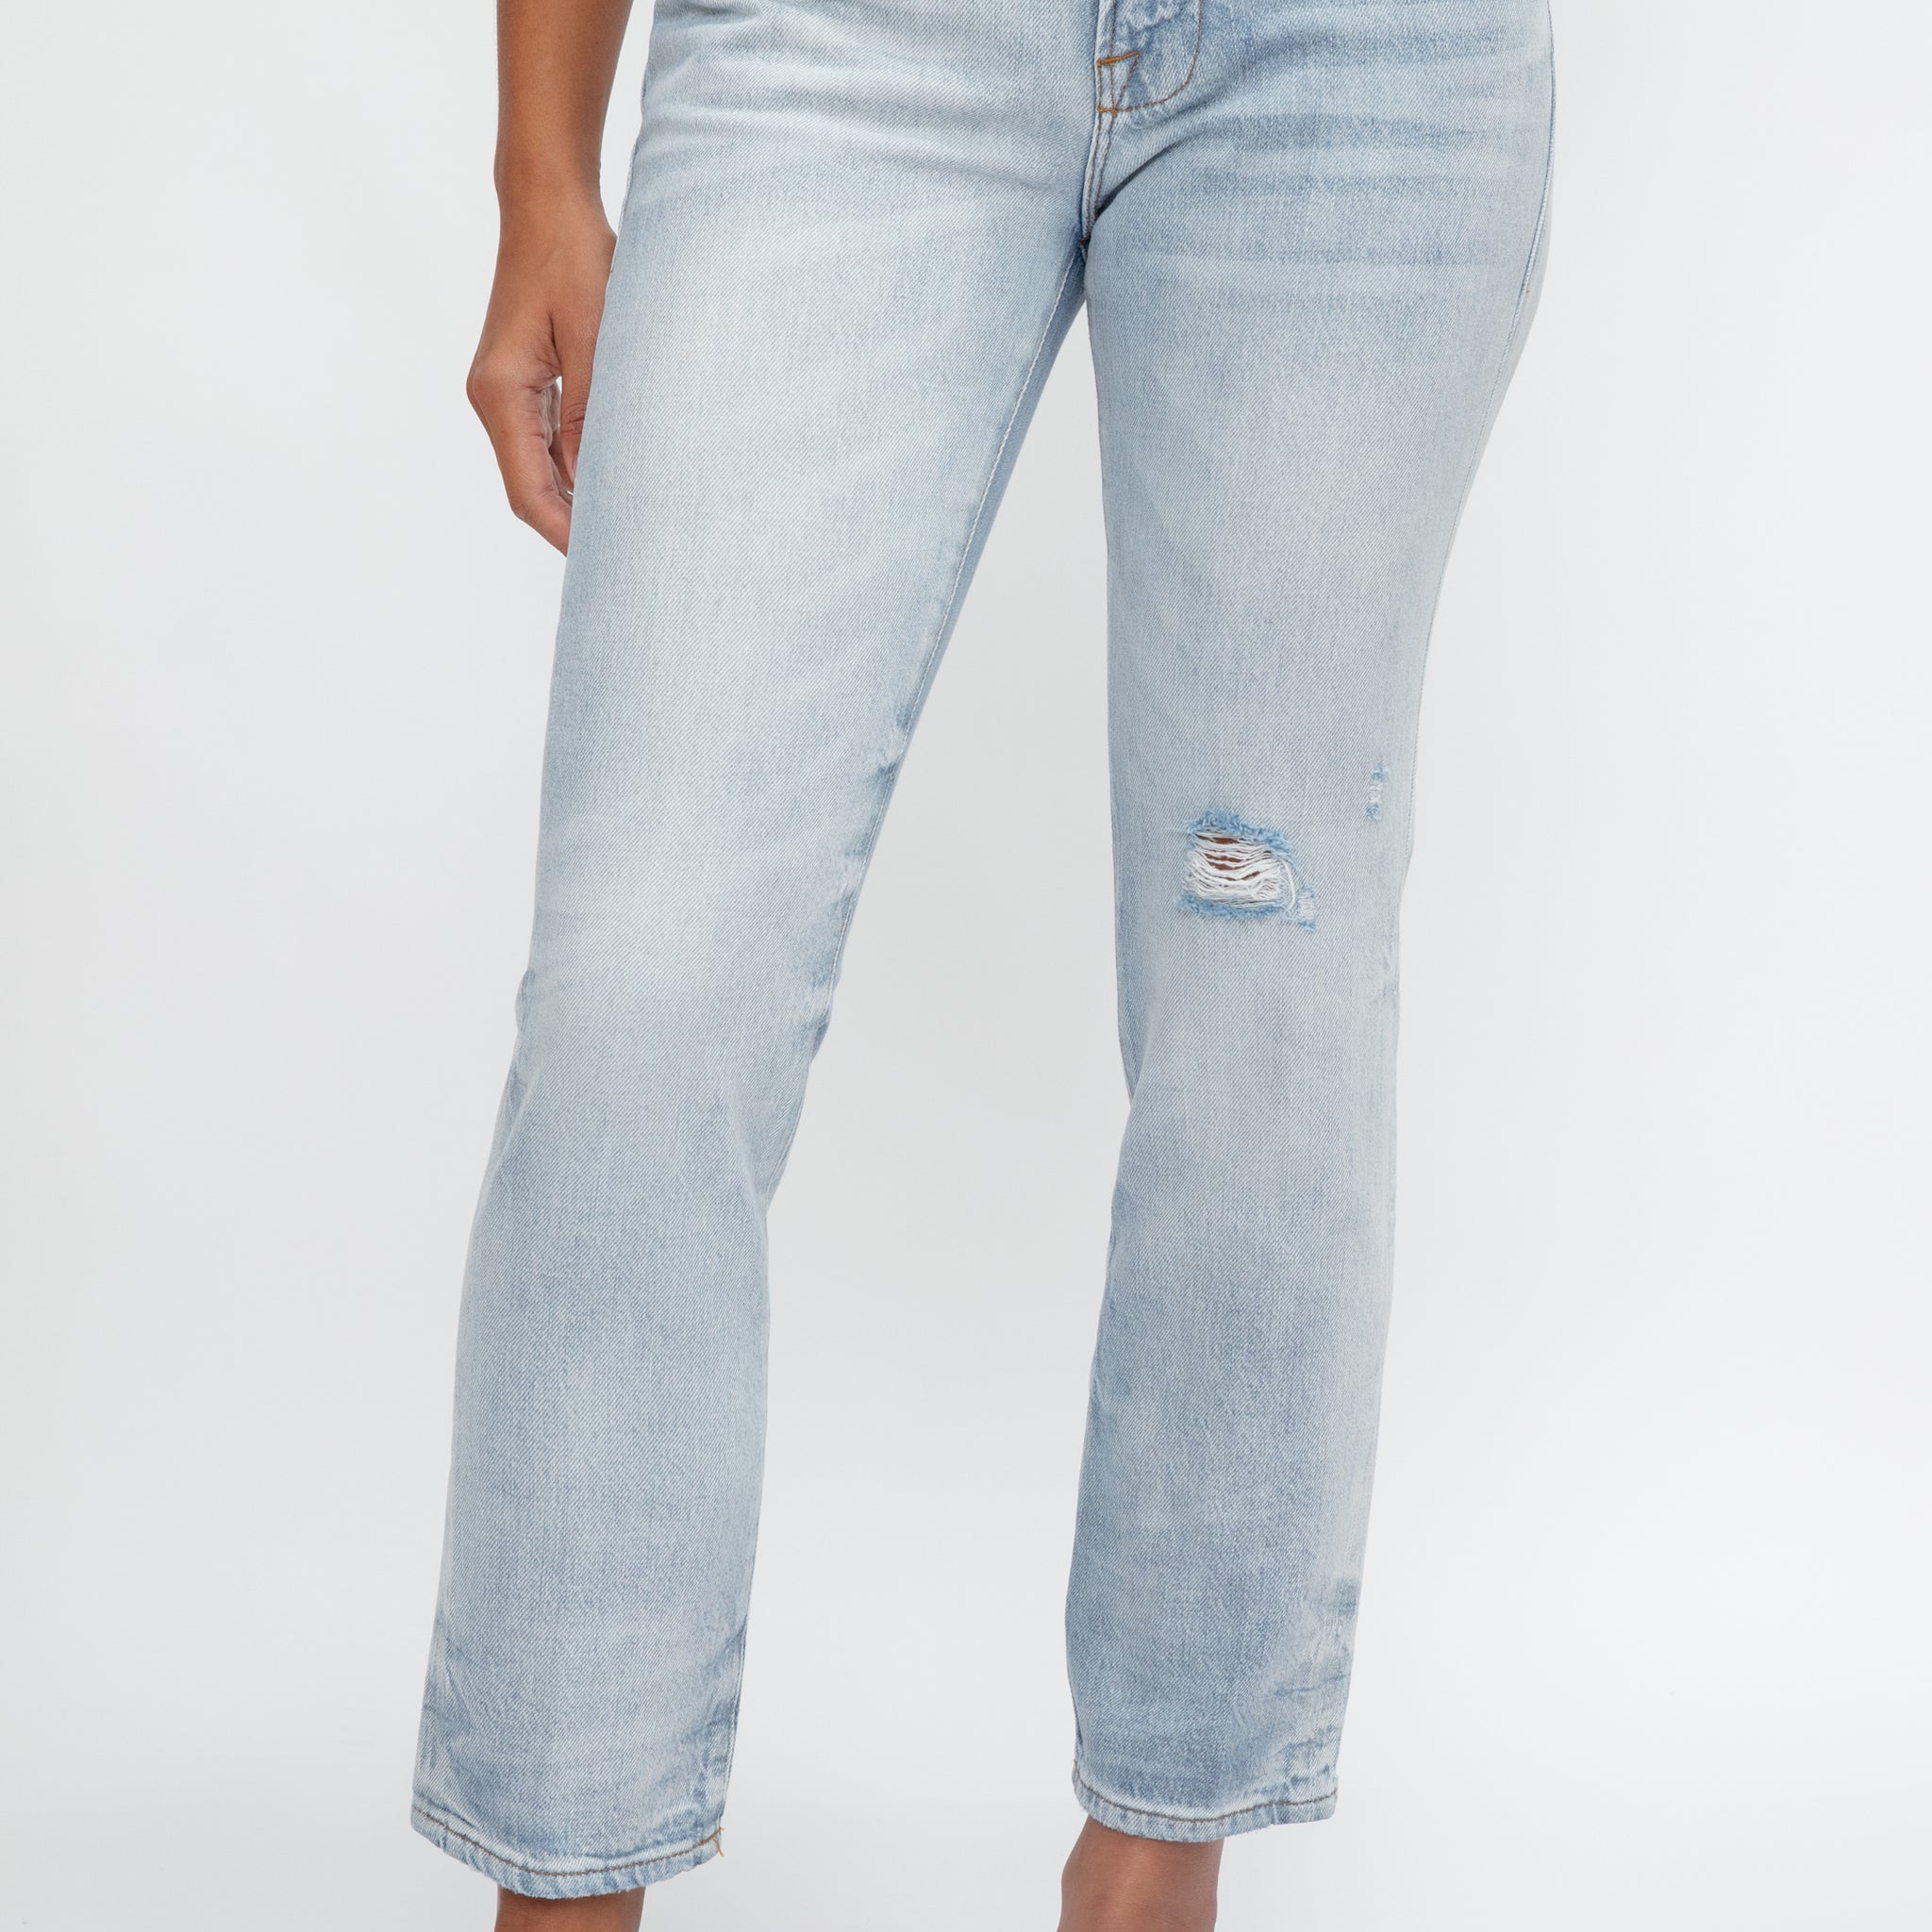 FRAME Le High Straight Jean in Winslow